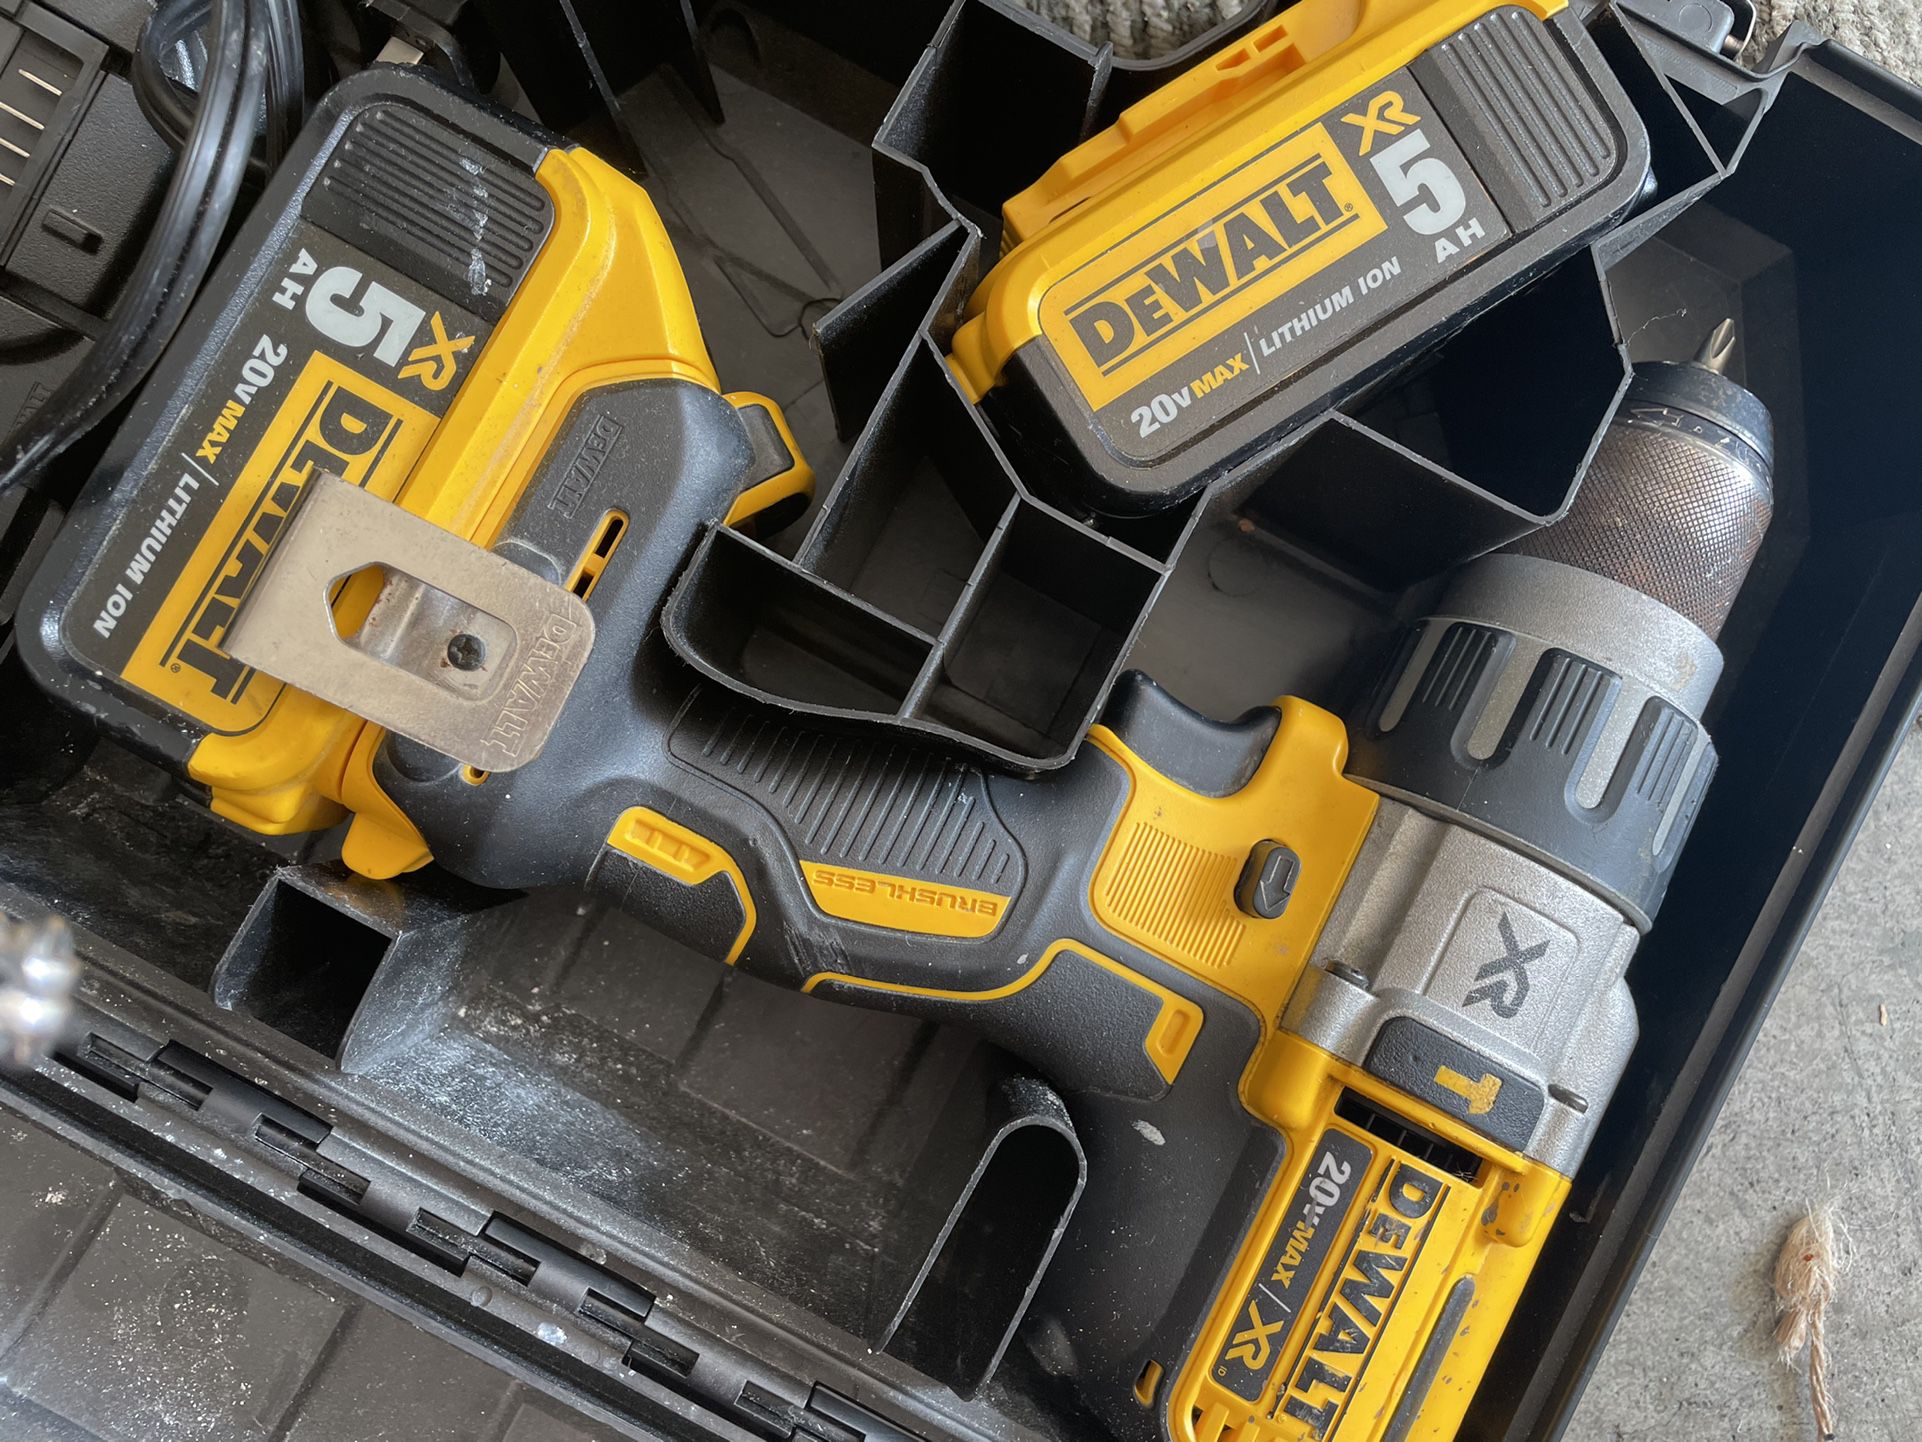 Dewalt XR Brushless Cordless 20v Drill With (2) 5AH Batteries Charger And Case 